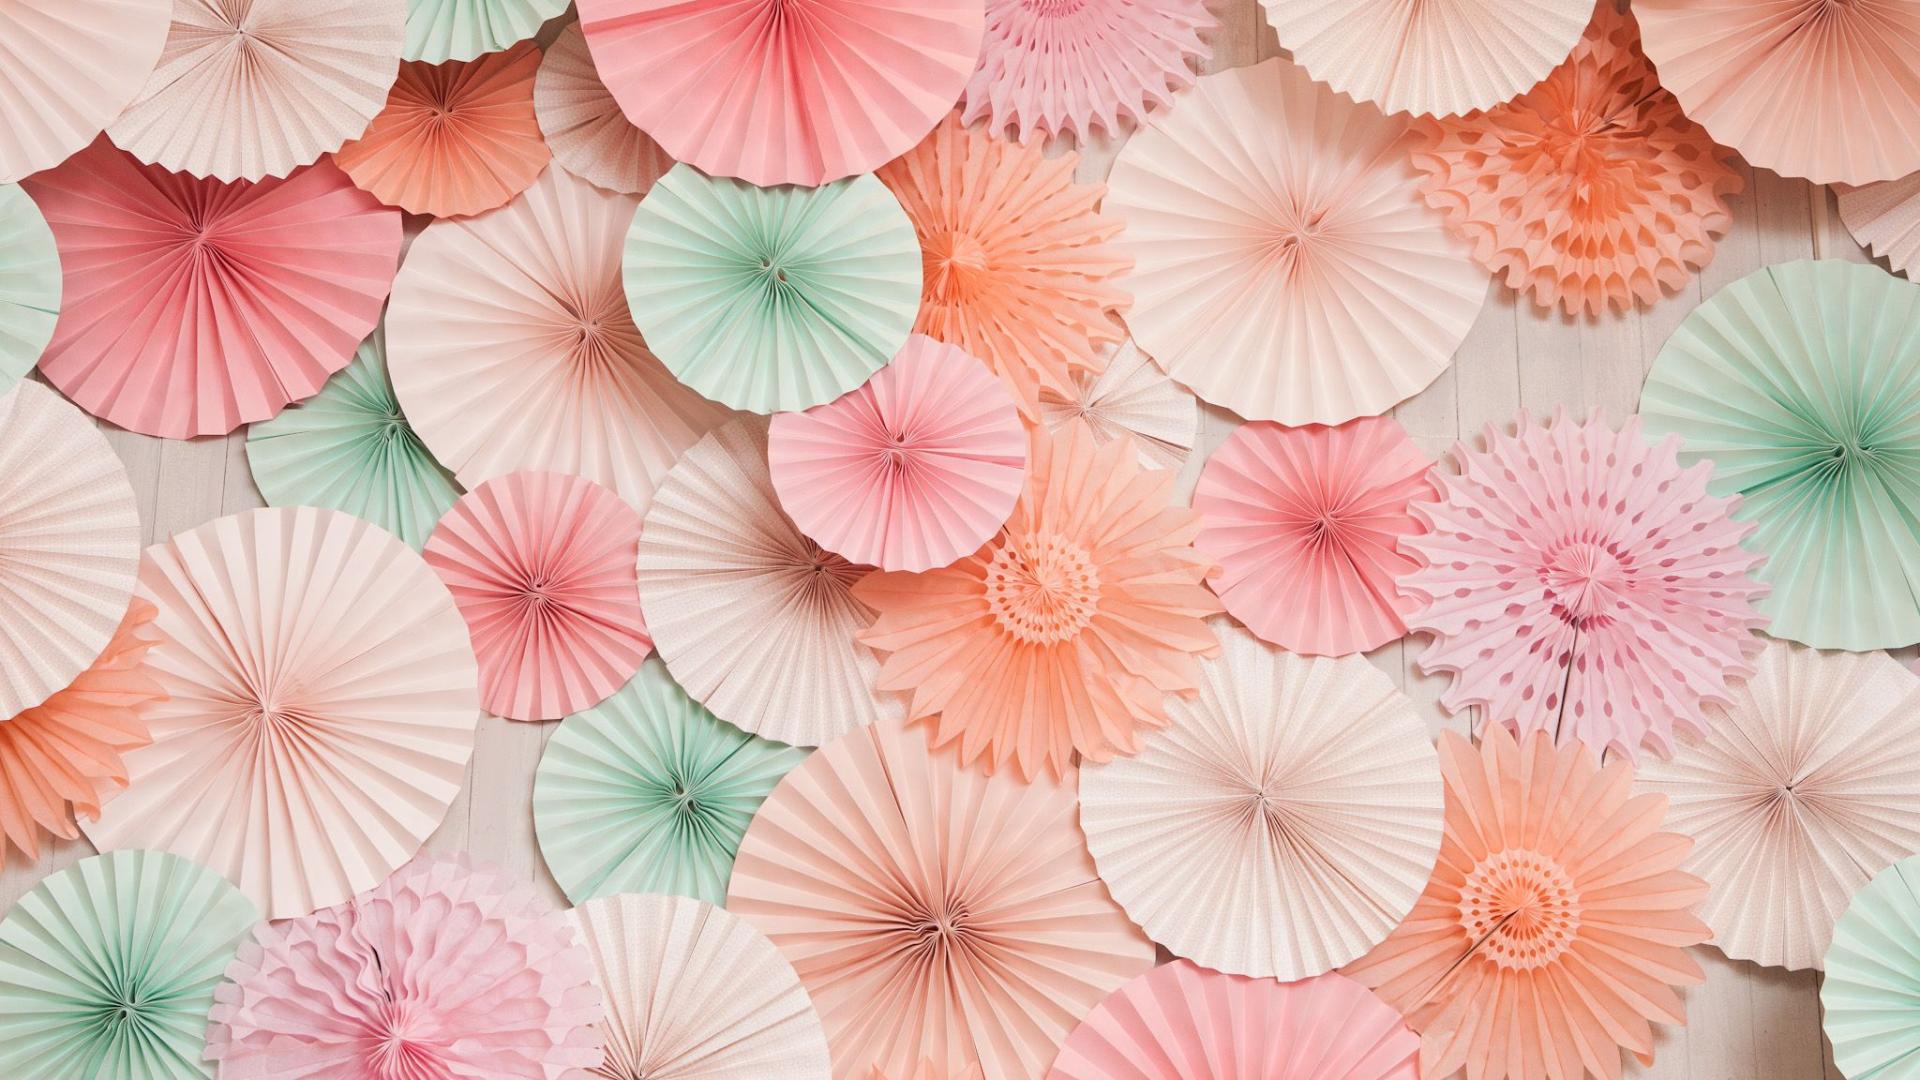 Mint and Coral Colored Paper Art Wallpaper Wallpaper. Wallpaper Download. High Resolution Wallpaper